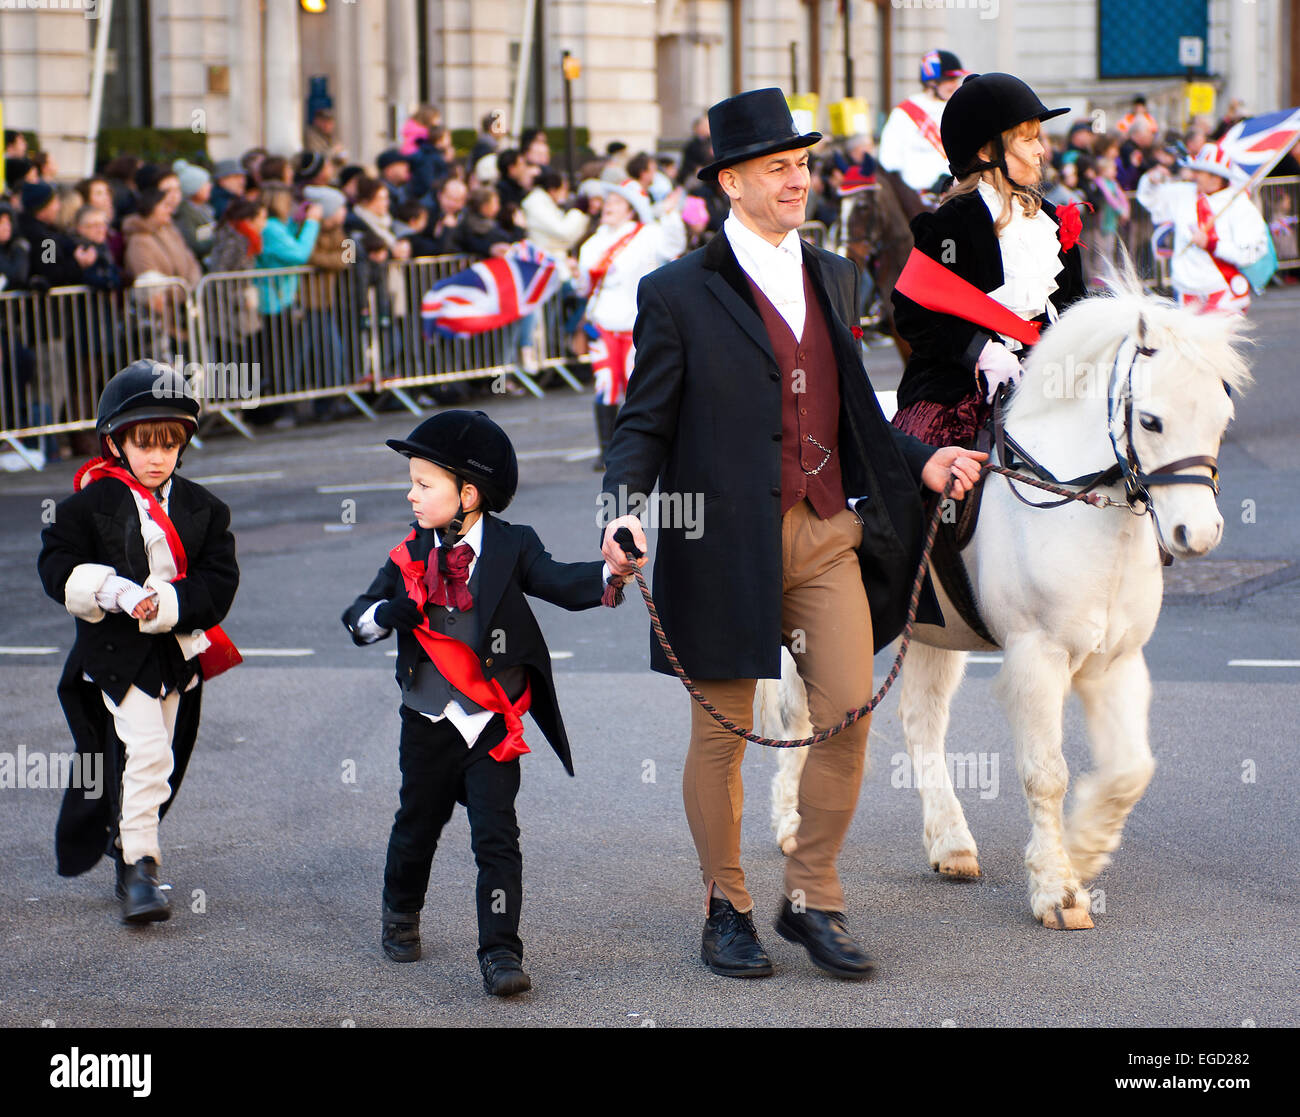 This pony and its team of small riders were definitely among the most popular participants in the 2013 New Year’s Day Parade. Stock Photo